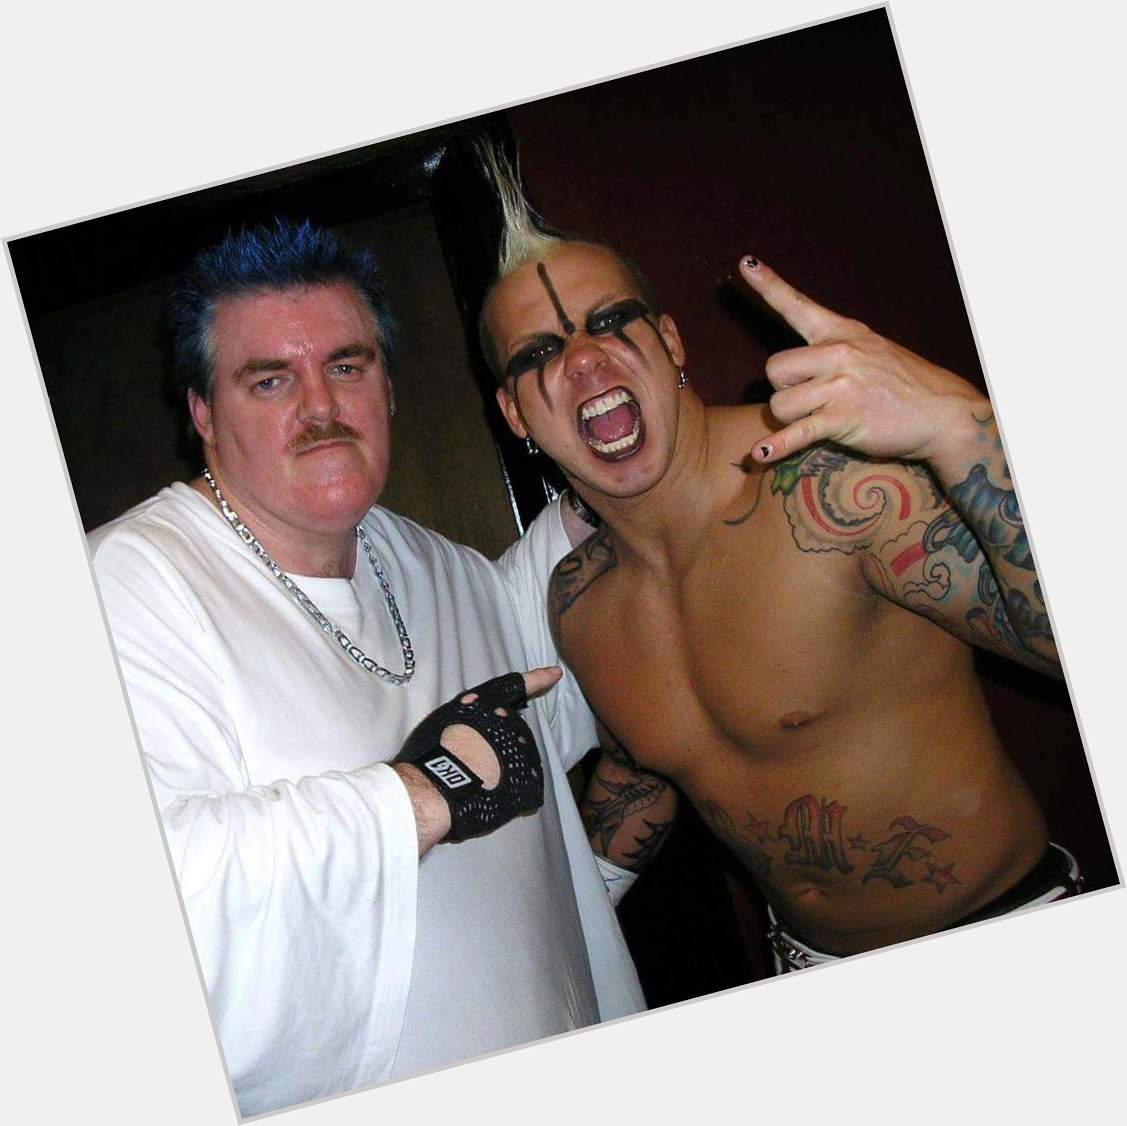  HAPPY 38th BIRTHDAY To my friend, Shannon Moore. 